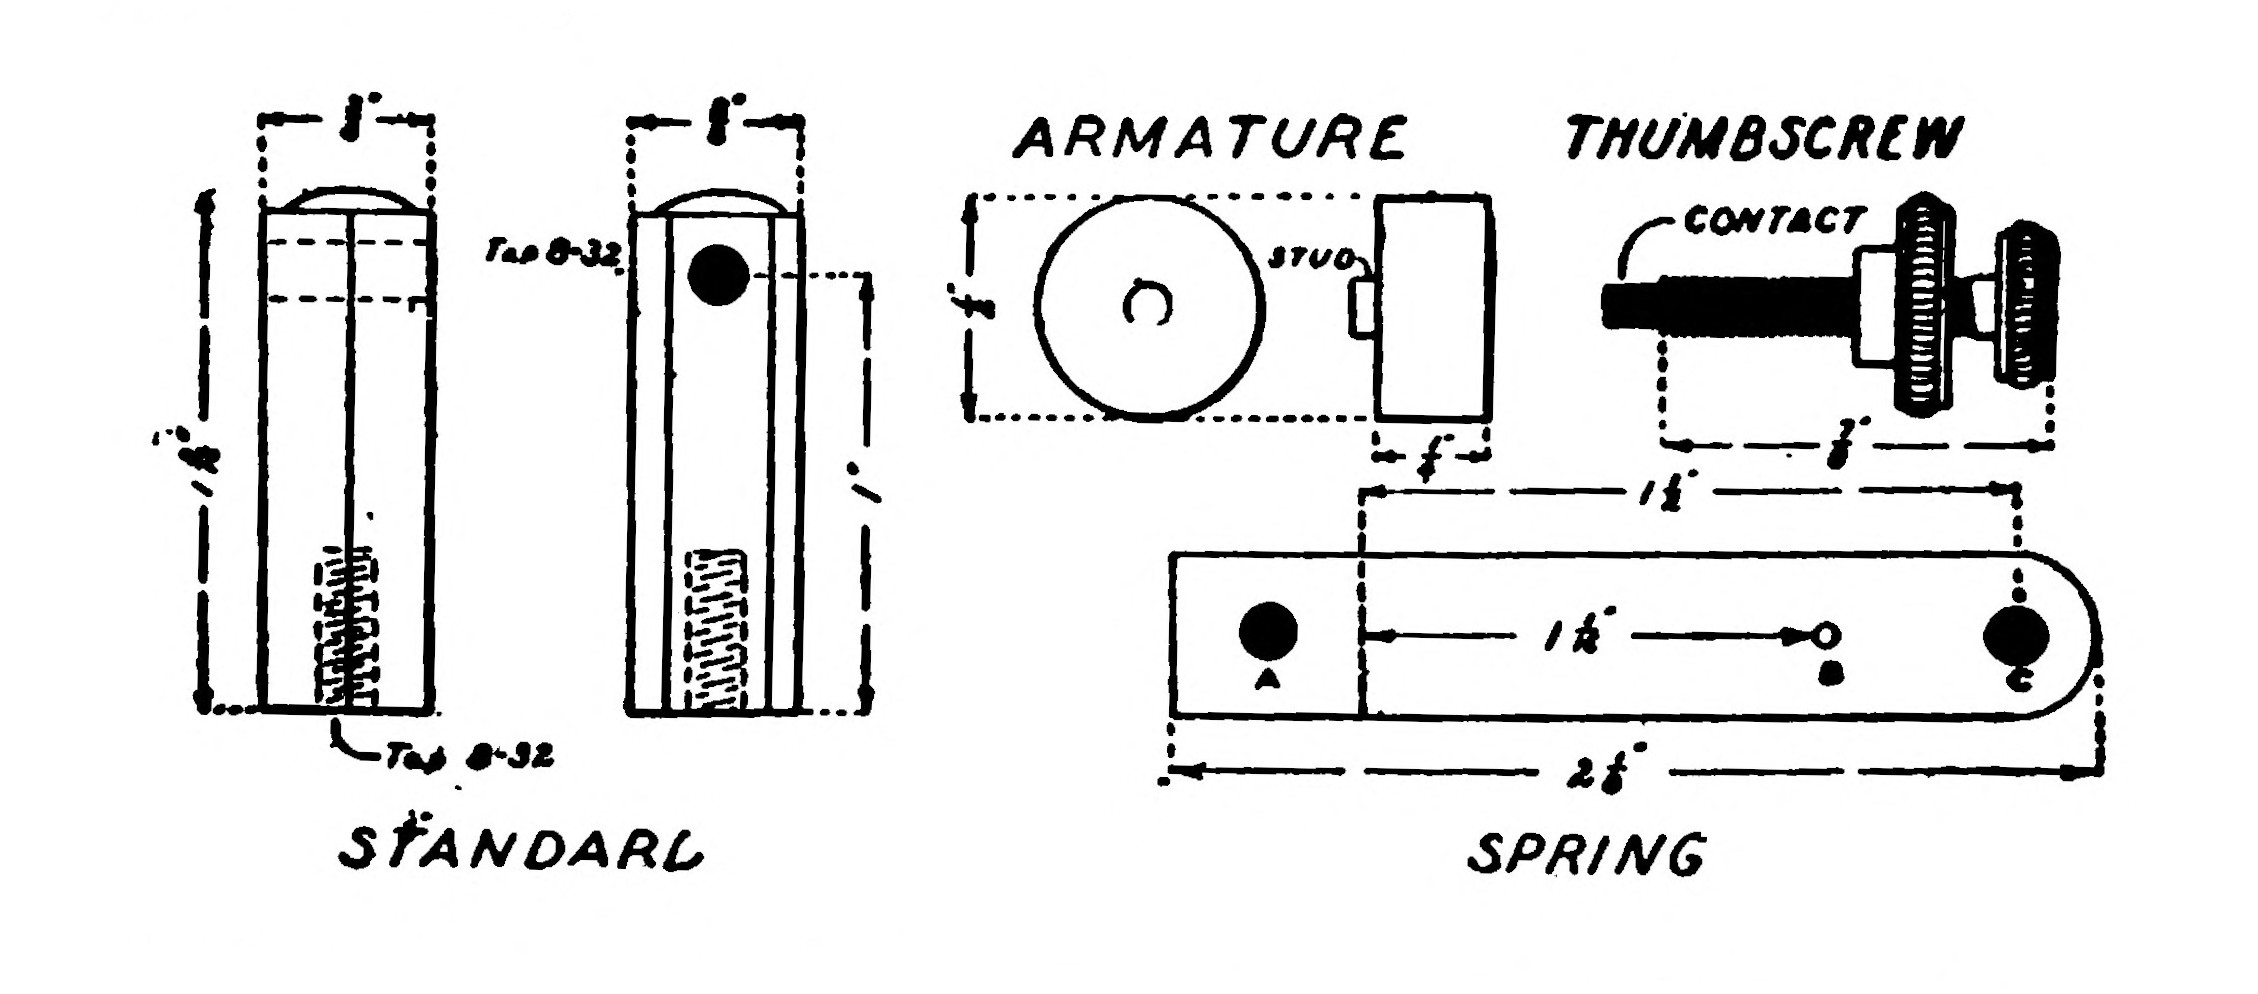 FIG. 115.—Details of the Interrupter. The Spring and Standard for the One inch coil should be made one-quarter of an inch longer.